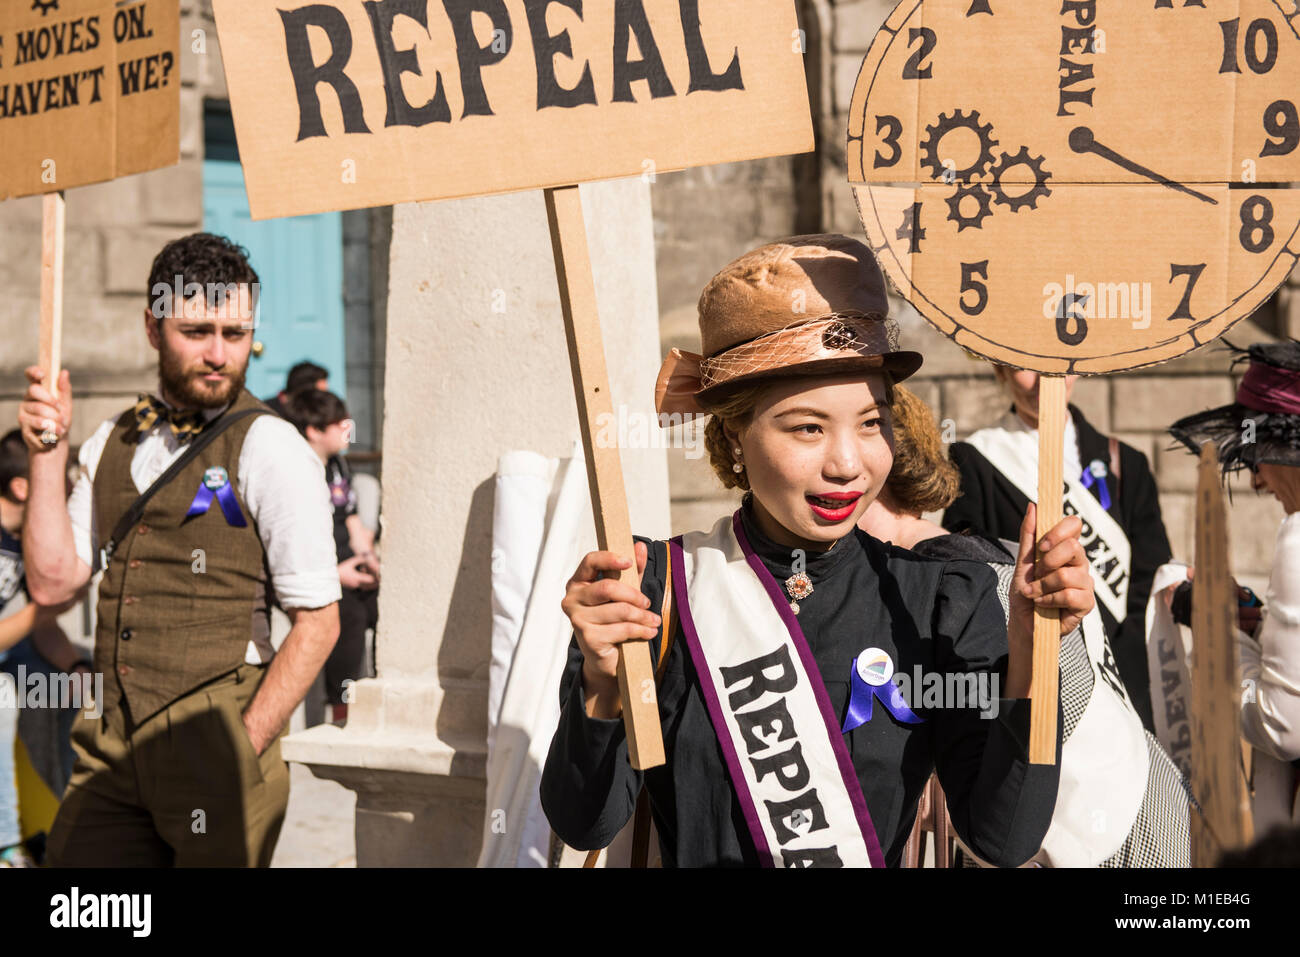 Repeal the 8th amendment to the Irish constitution. Pro- choice (abortion) rally in Dublin, Ireland Stock Photo